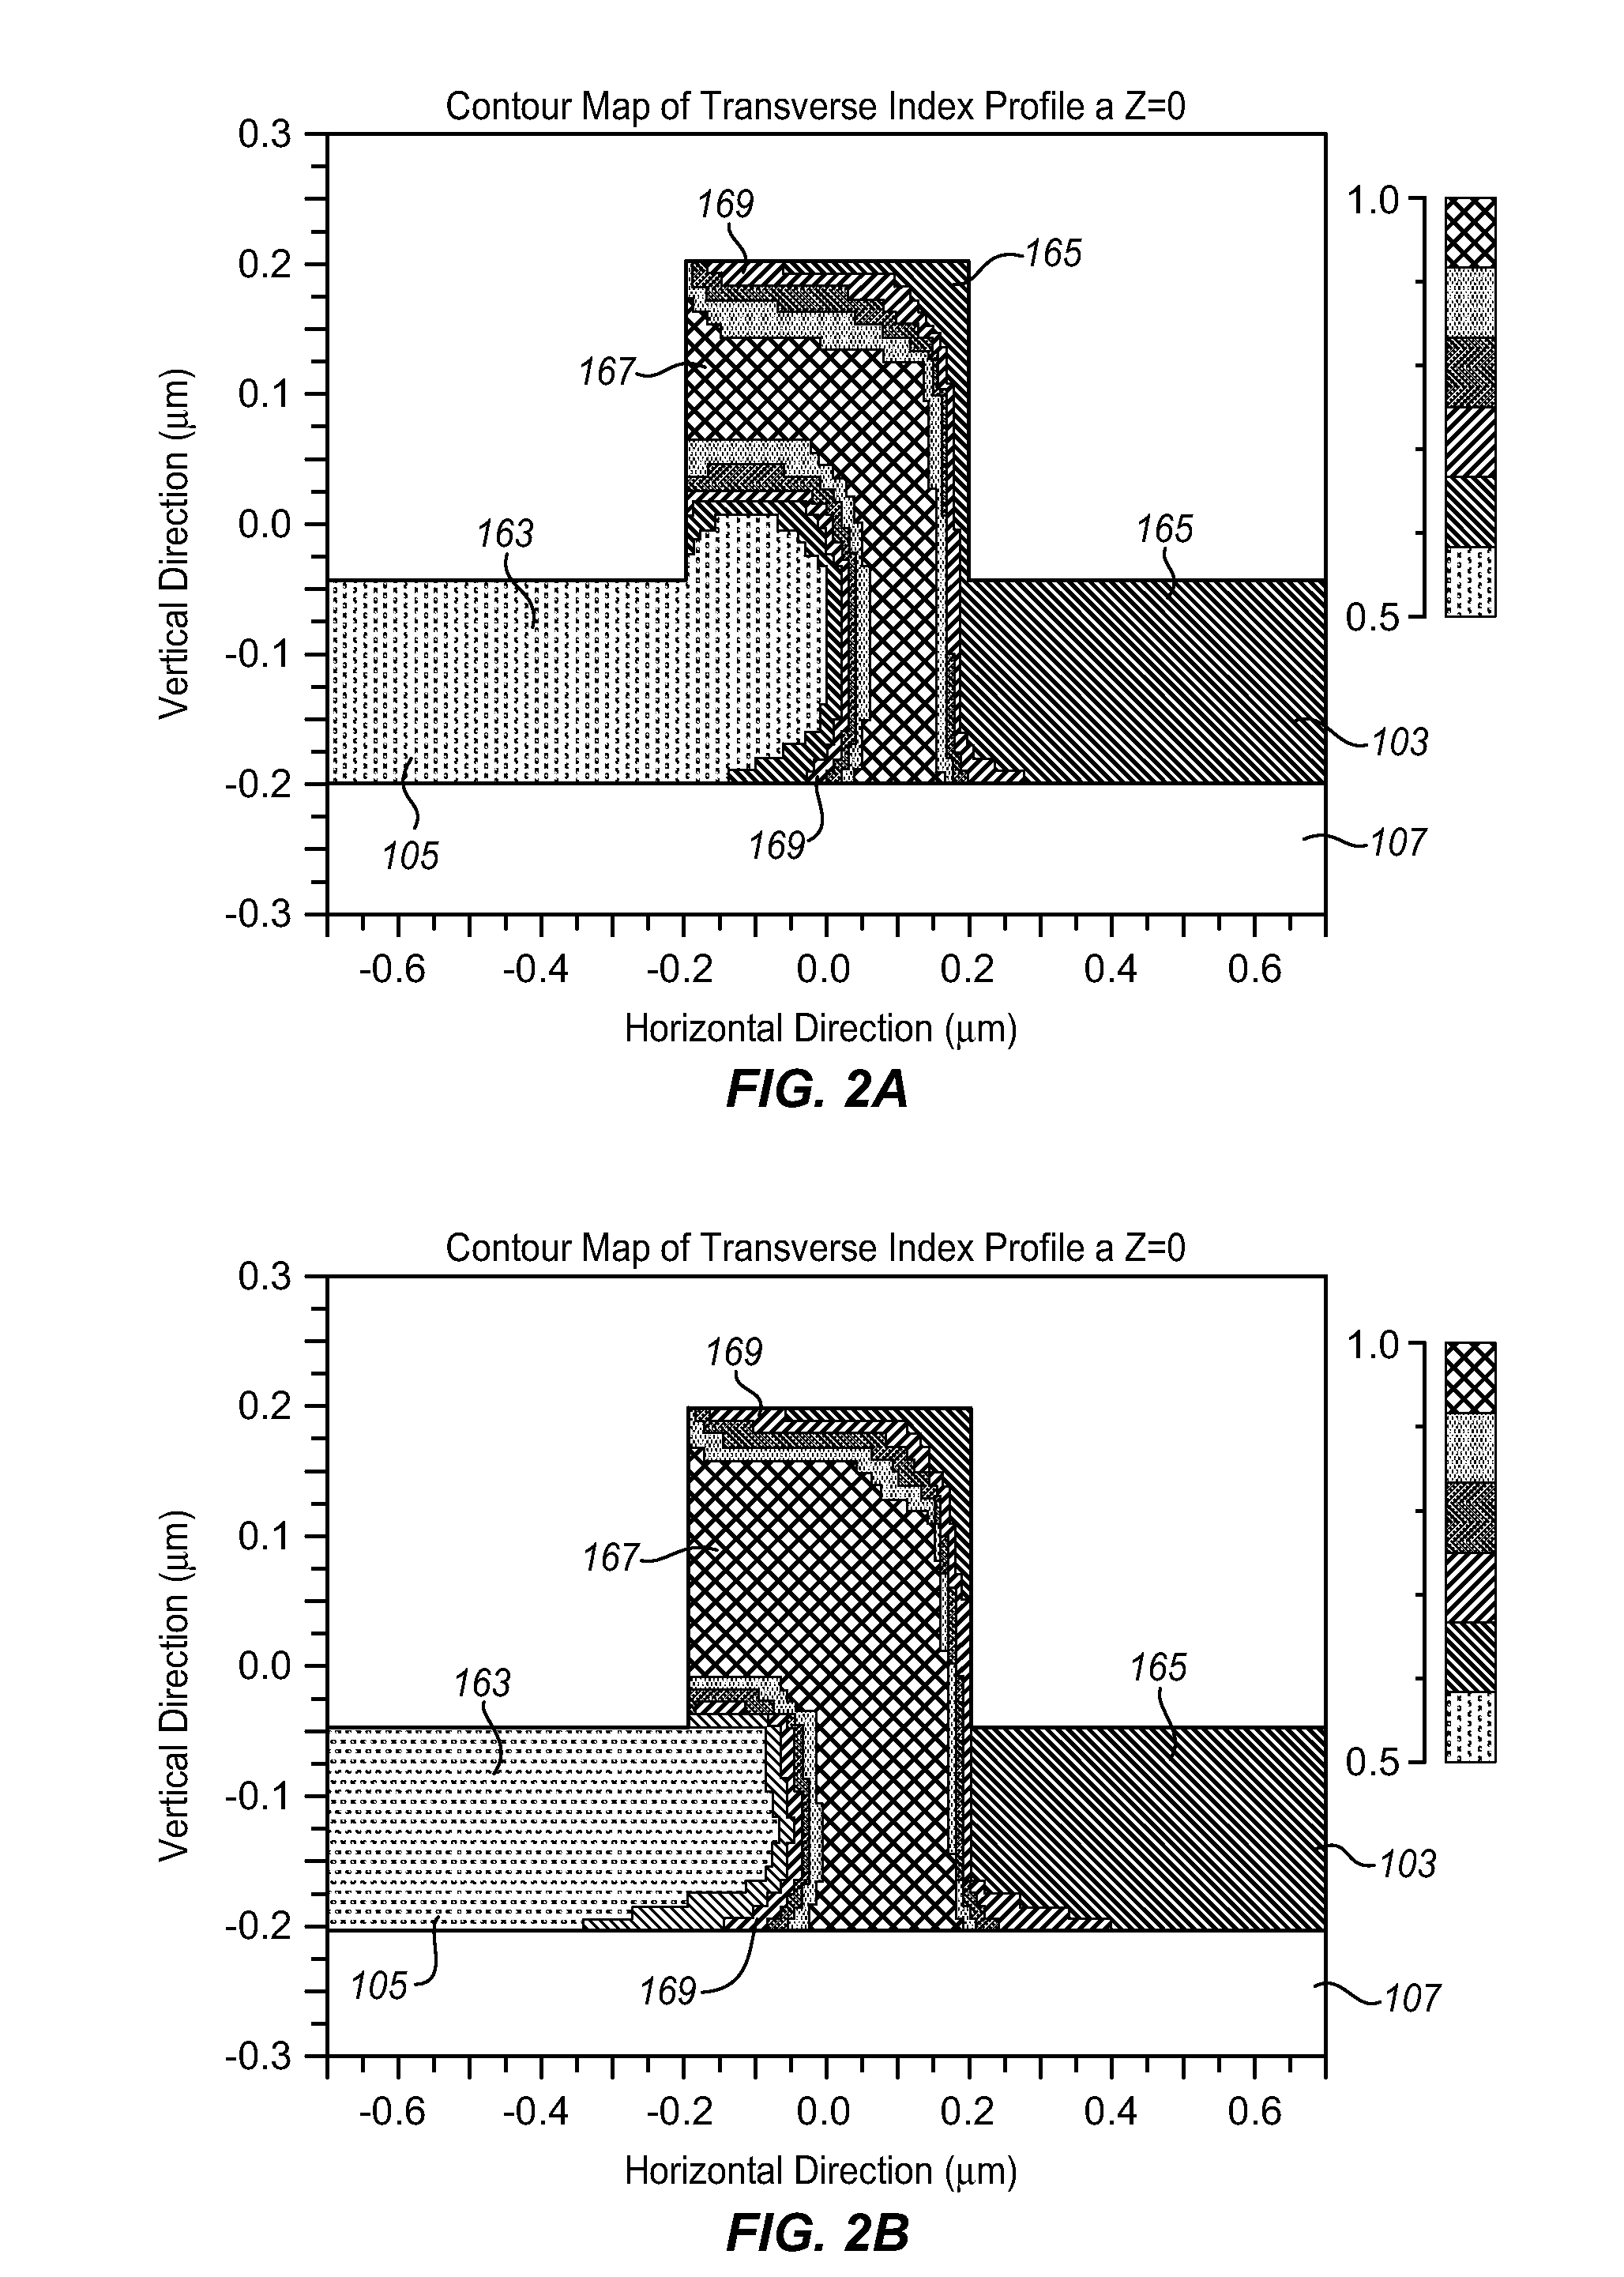 Method and Apparatus for High Speed Silicon Optical Modulation Using PN Diode